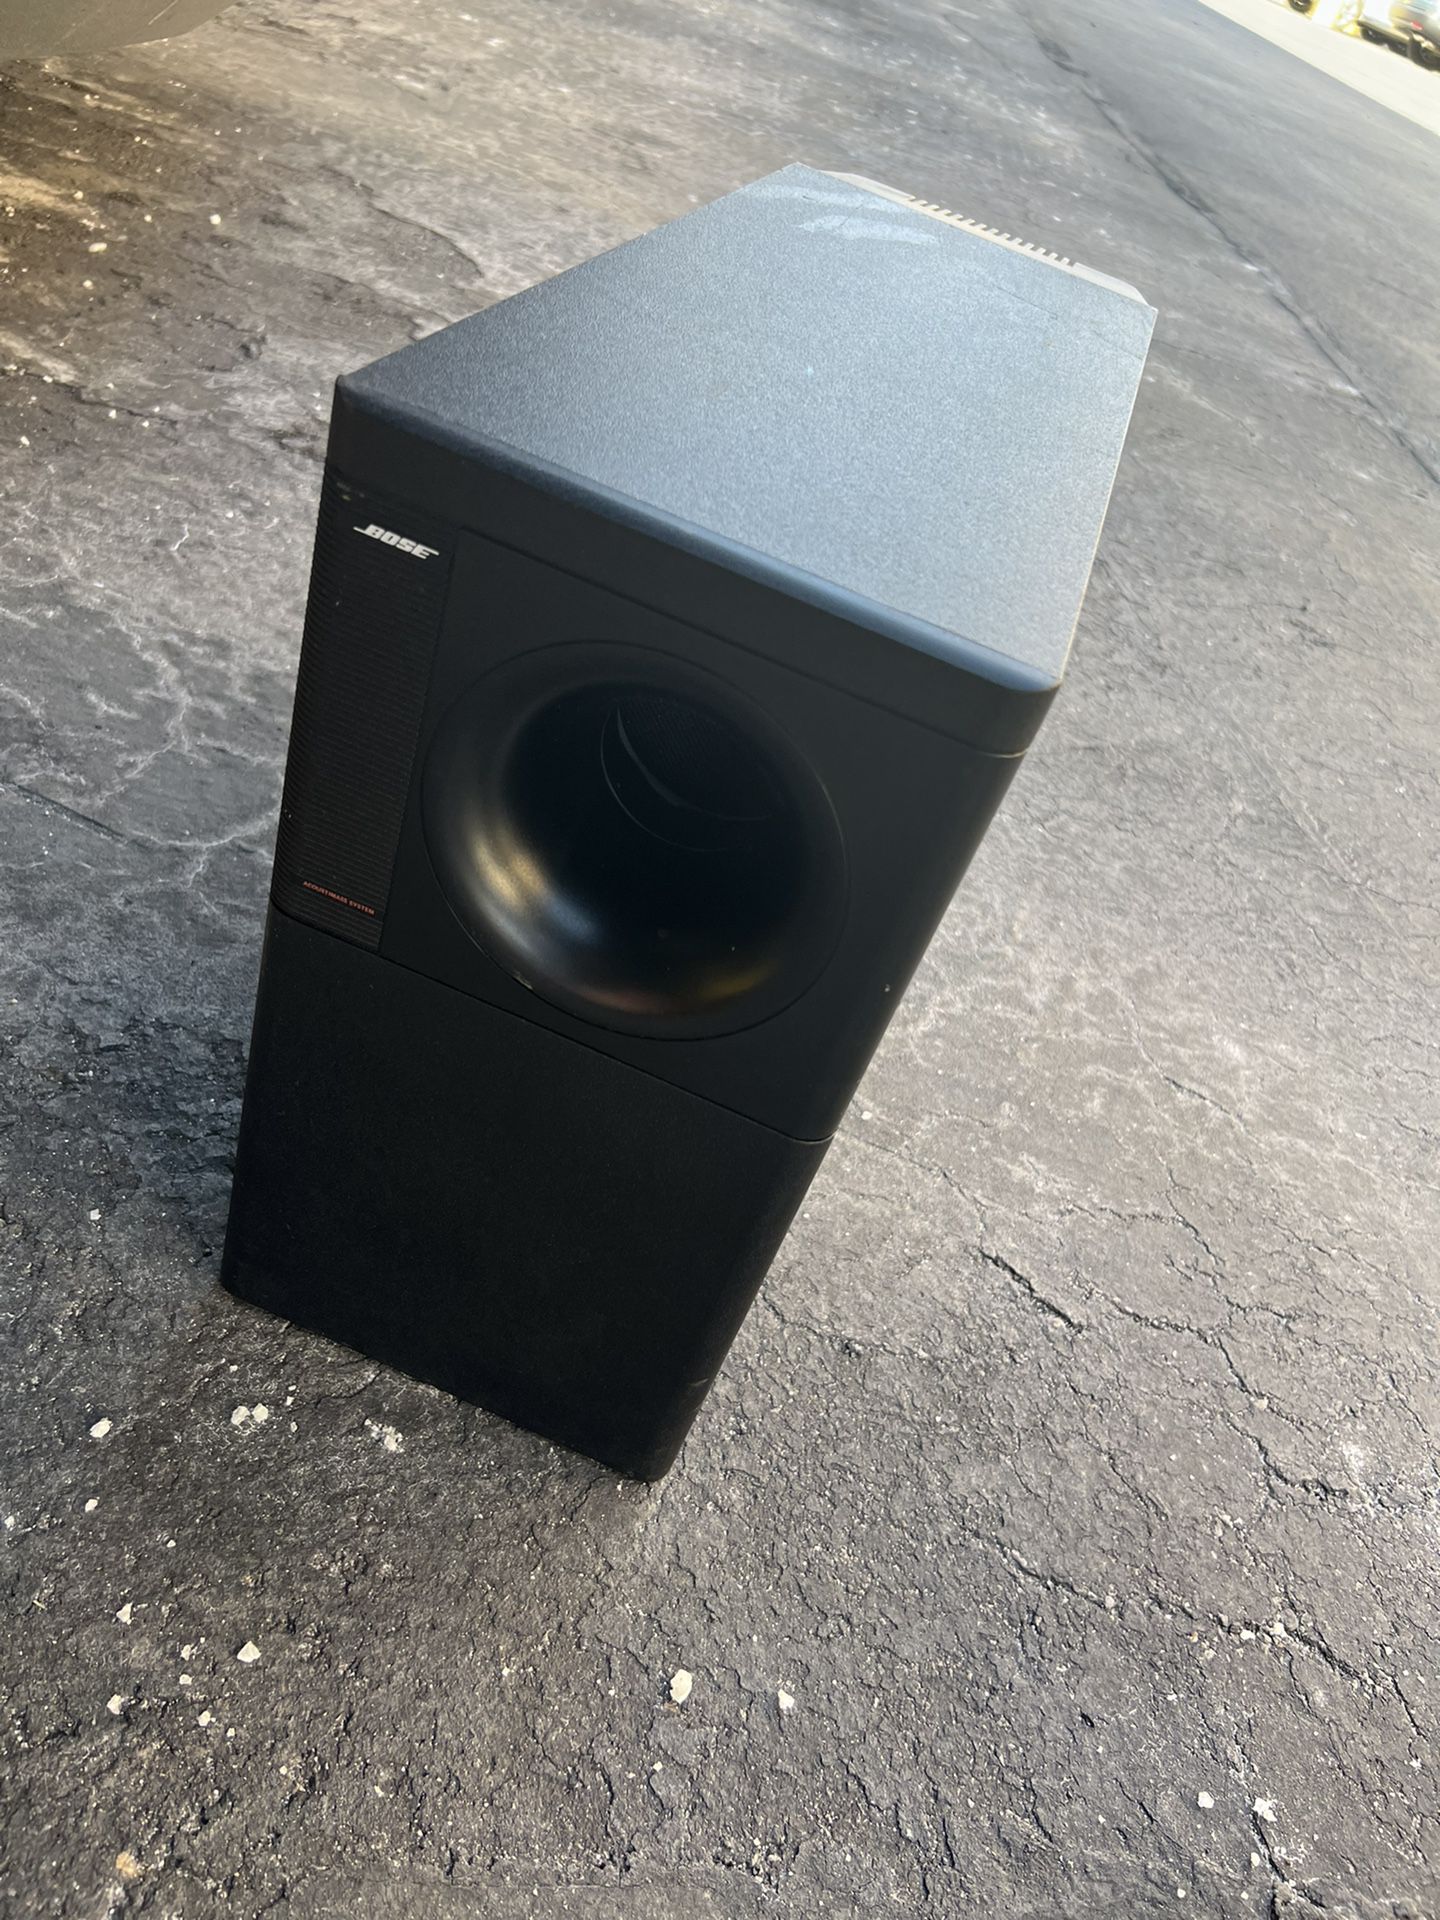 BOSE Acoustimass AM 25 Subwoofer for Lifestyles 5, 8, 12, 20, 30, 